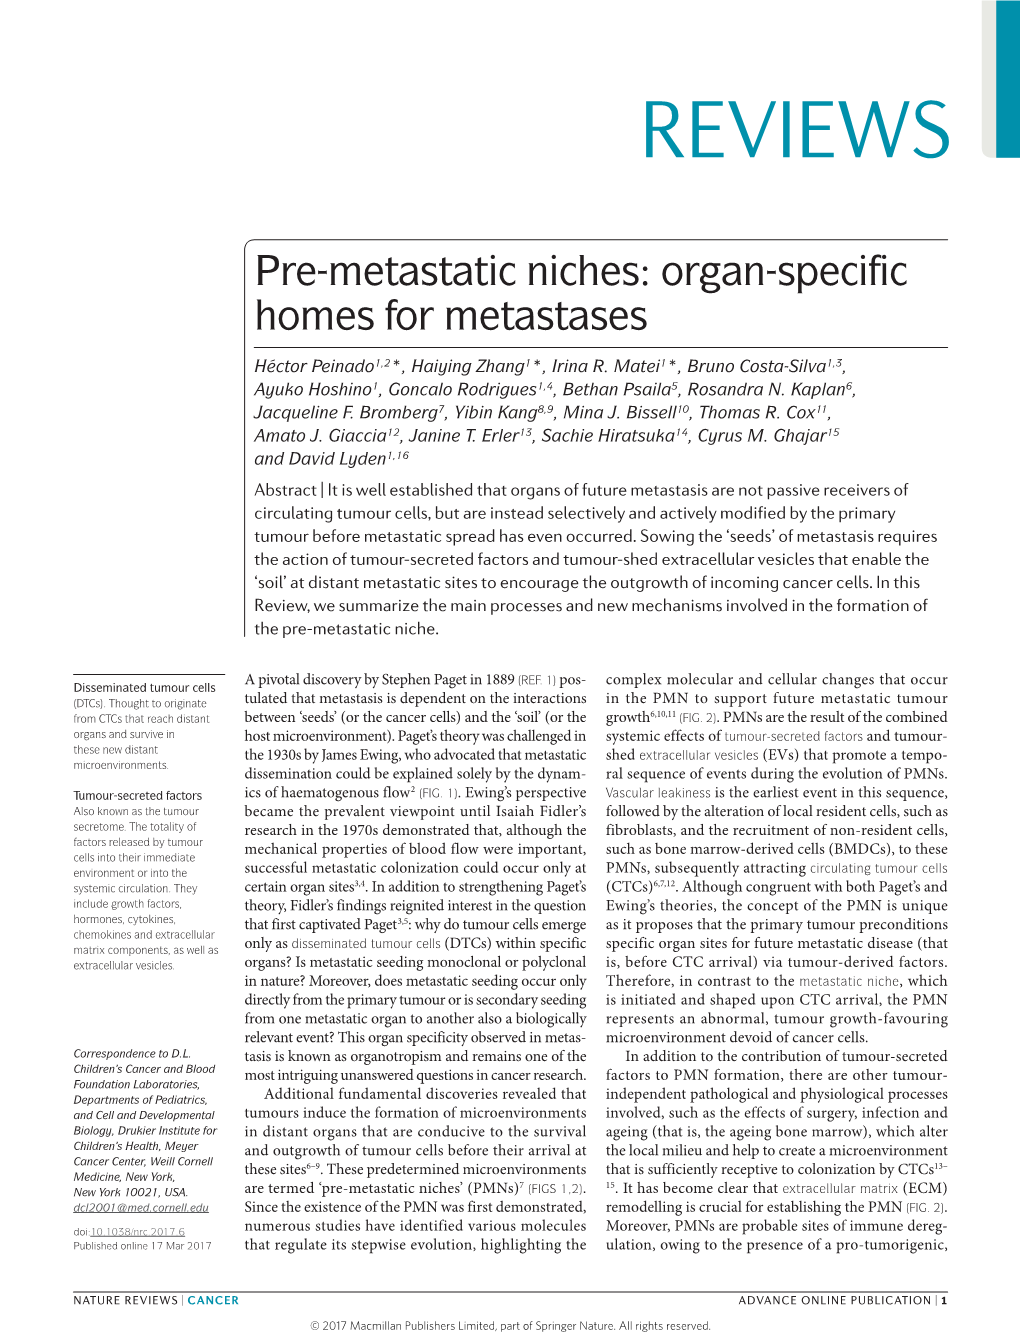 Pre-Metastatic Niches: Organ-Specific Homes for Metastases